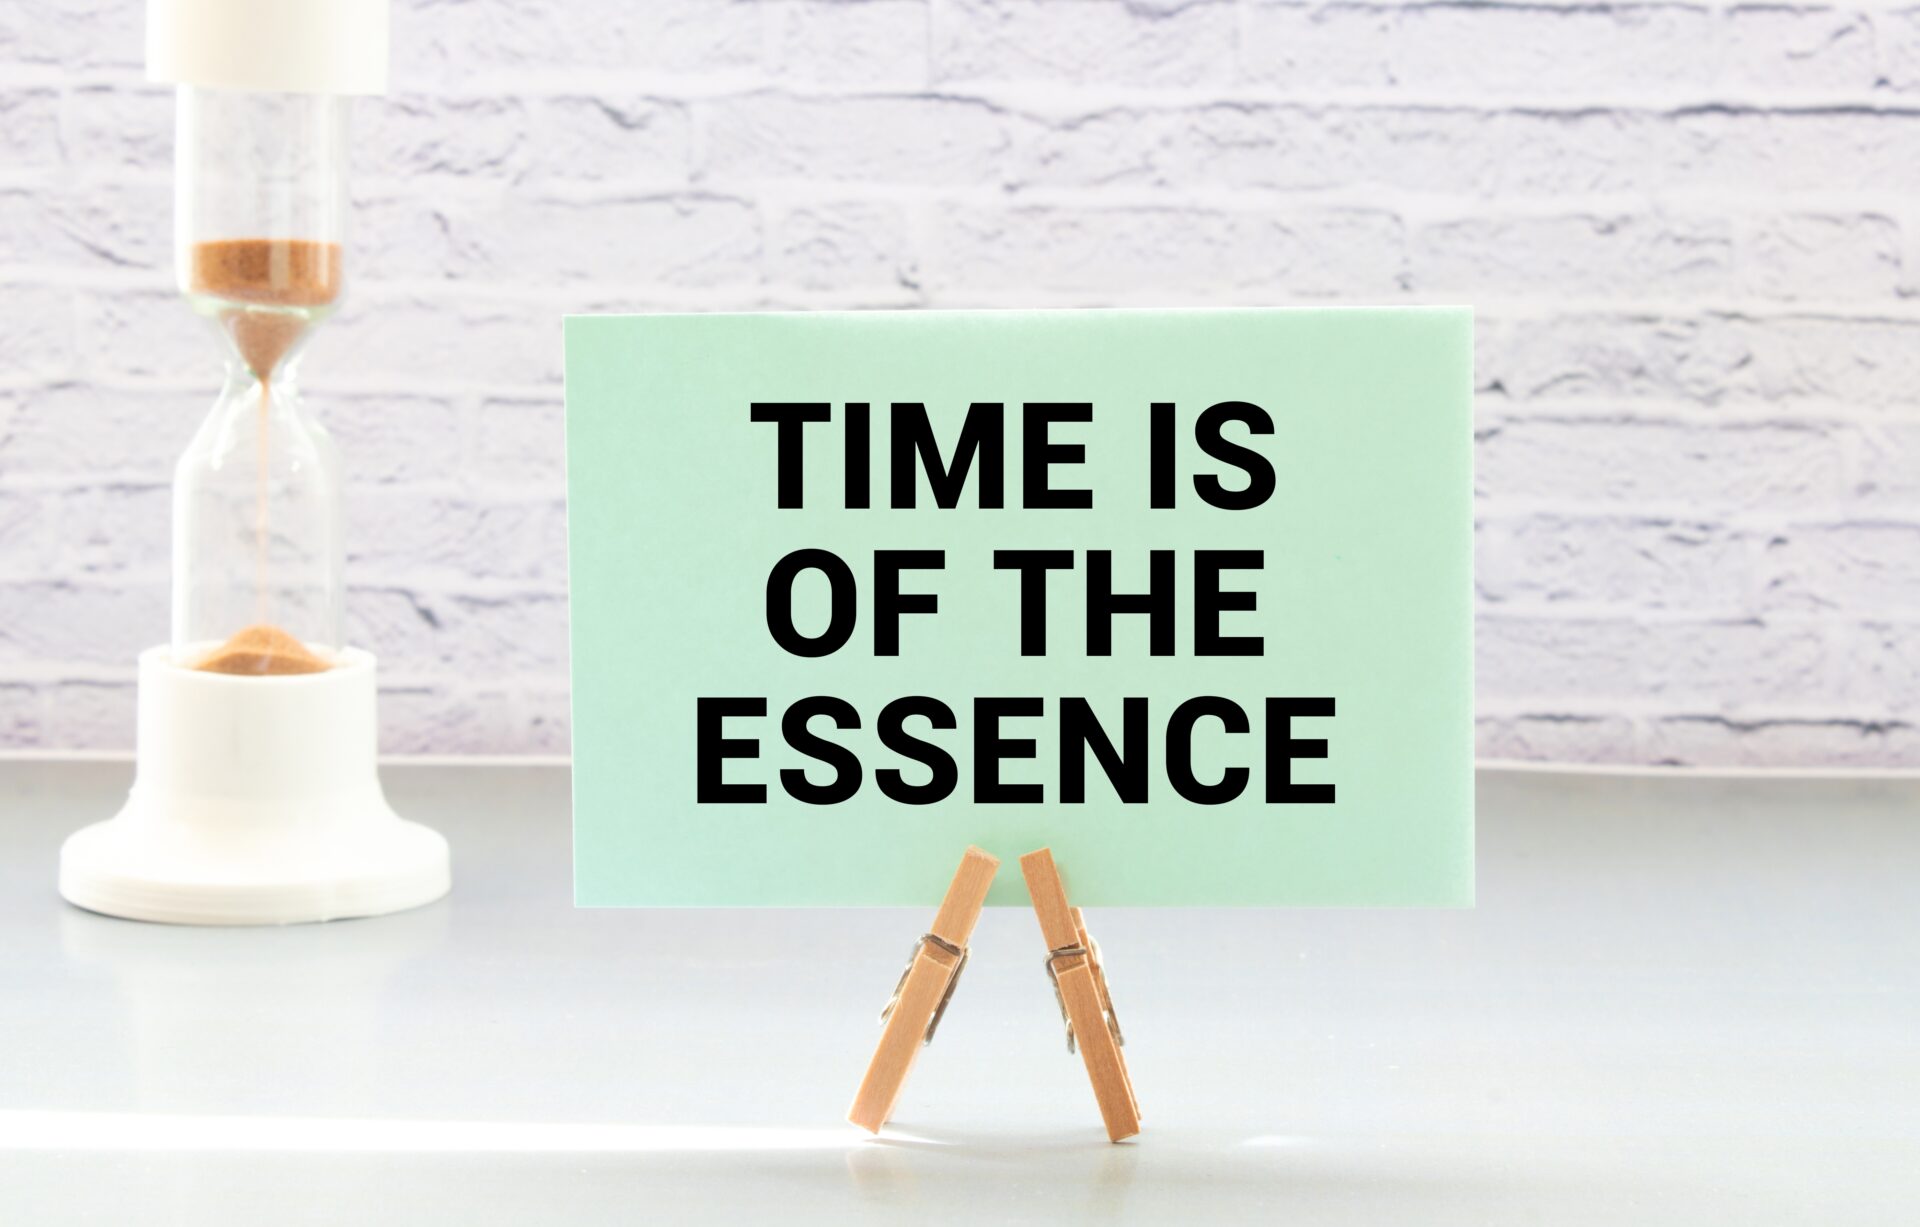 Time Is of the Essence.
